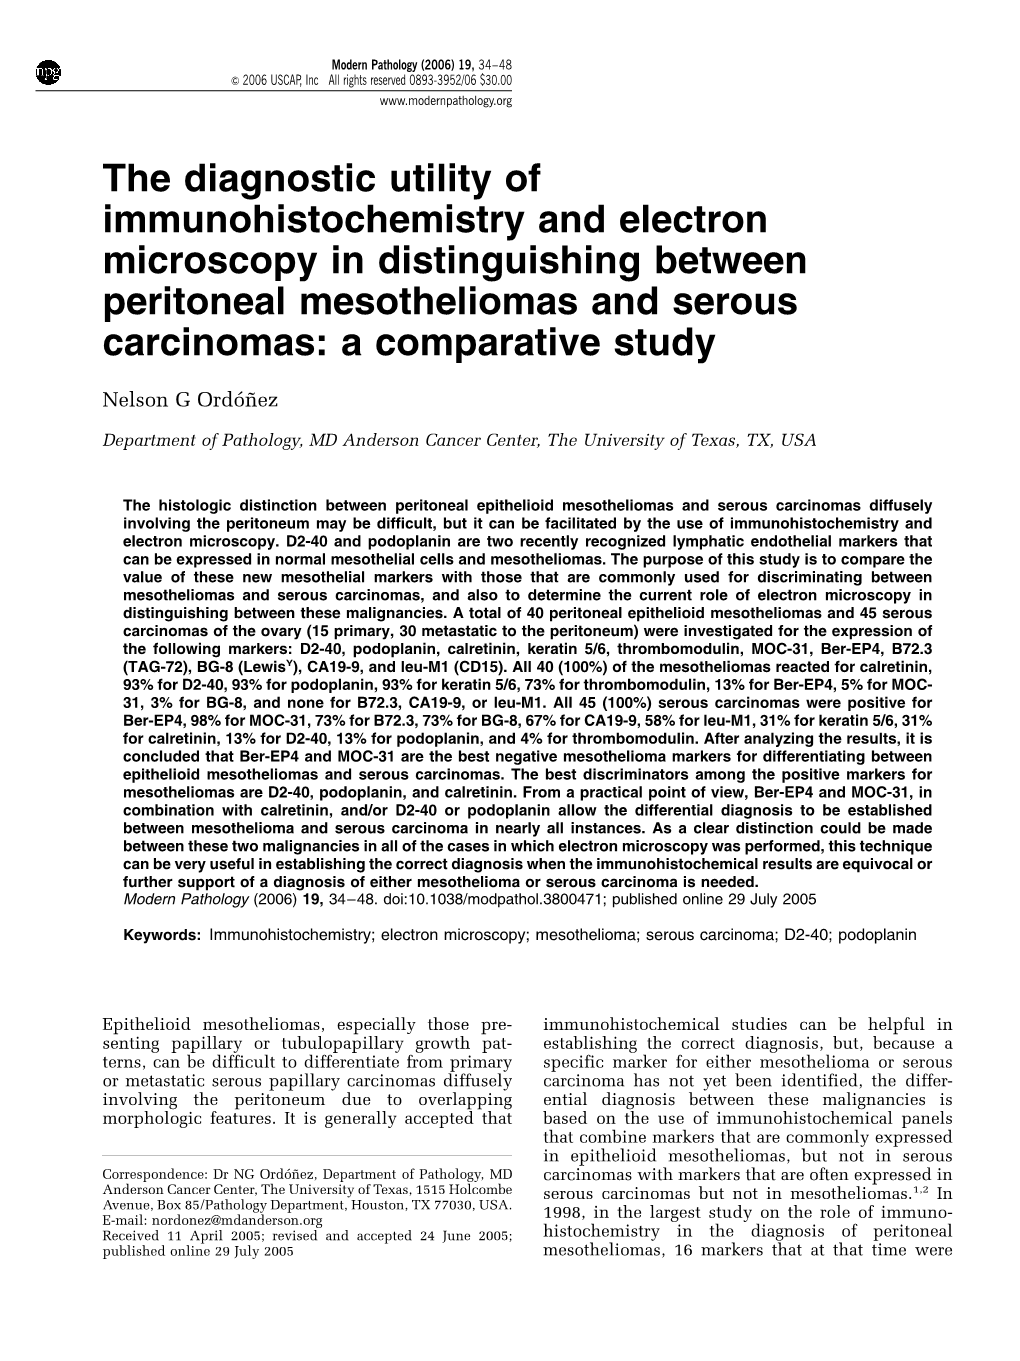 The Diagnostic Utility of Immunohistochemistry and Electron Microscopy in Distinguishing Between Peritoneal Mesotheliomas and Serous Carcinomas: a Comparative Study